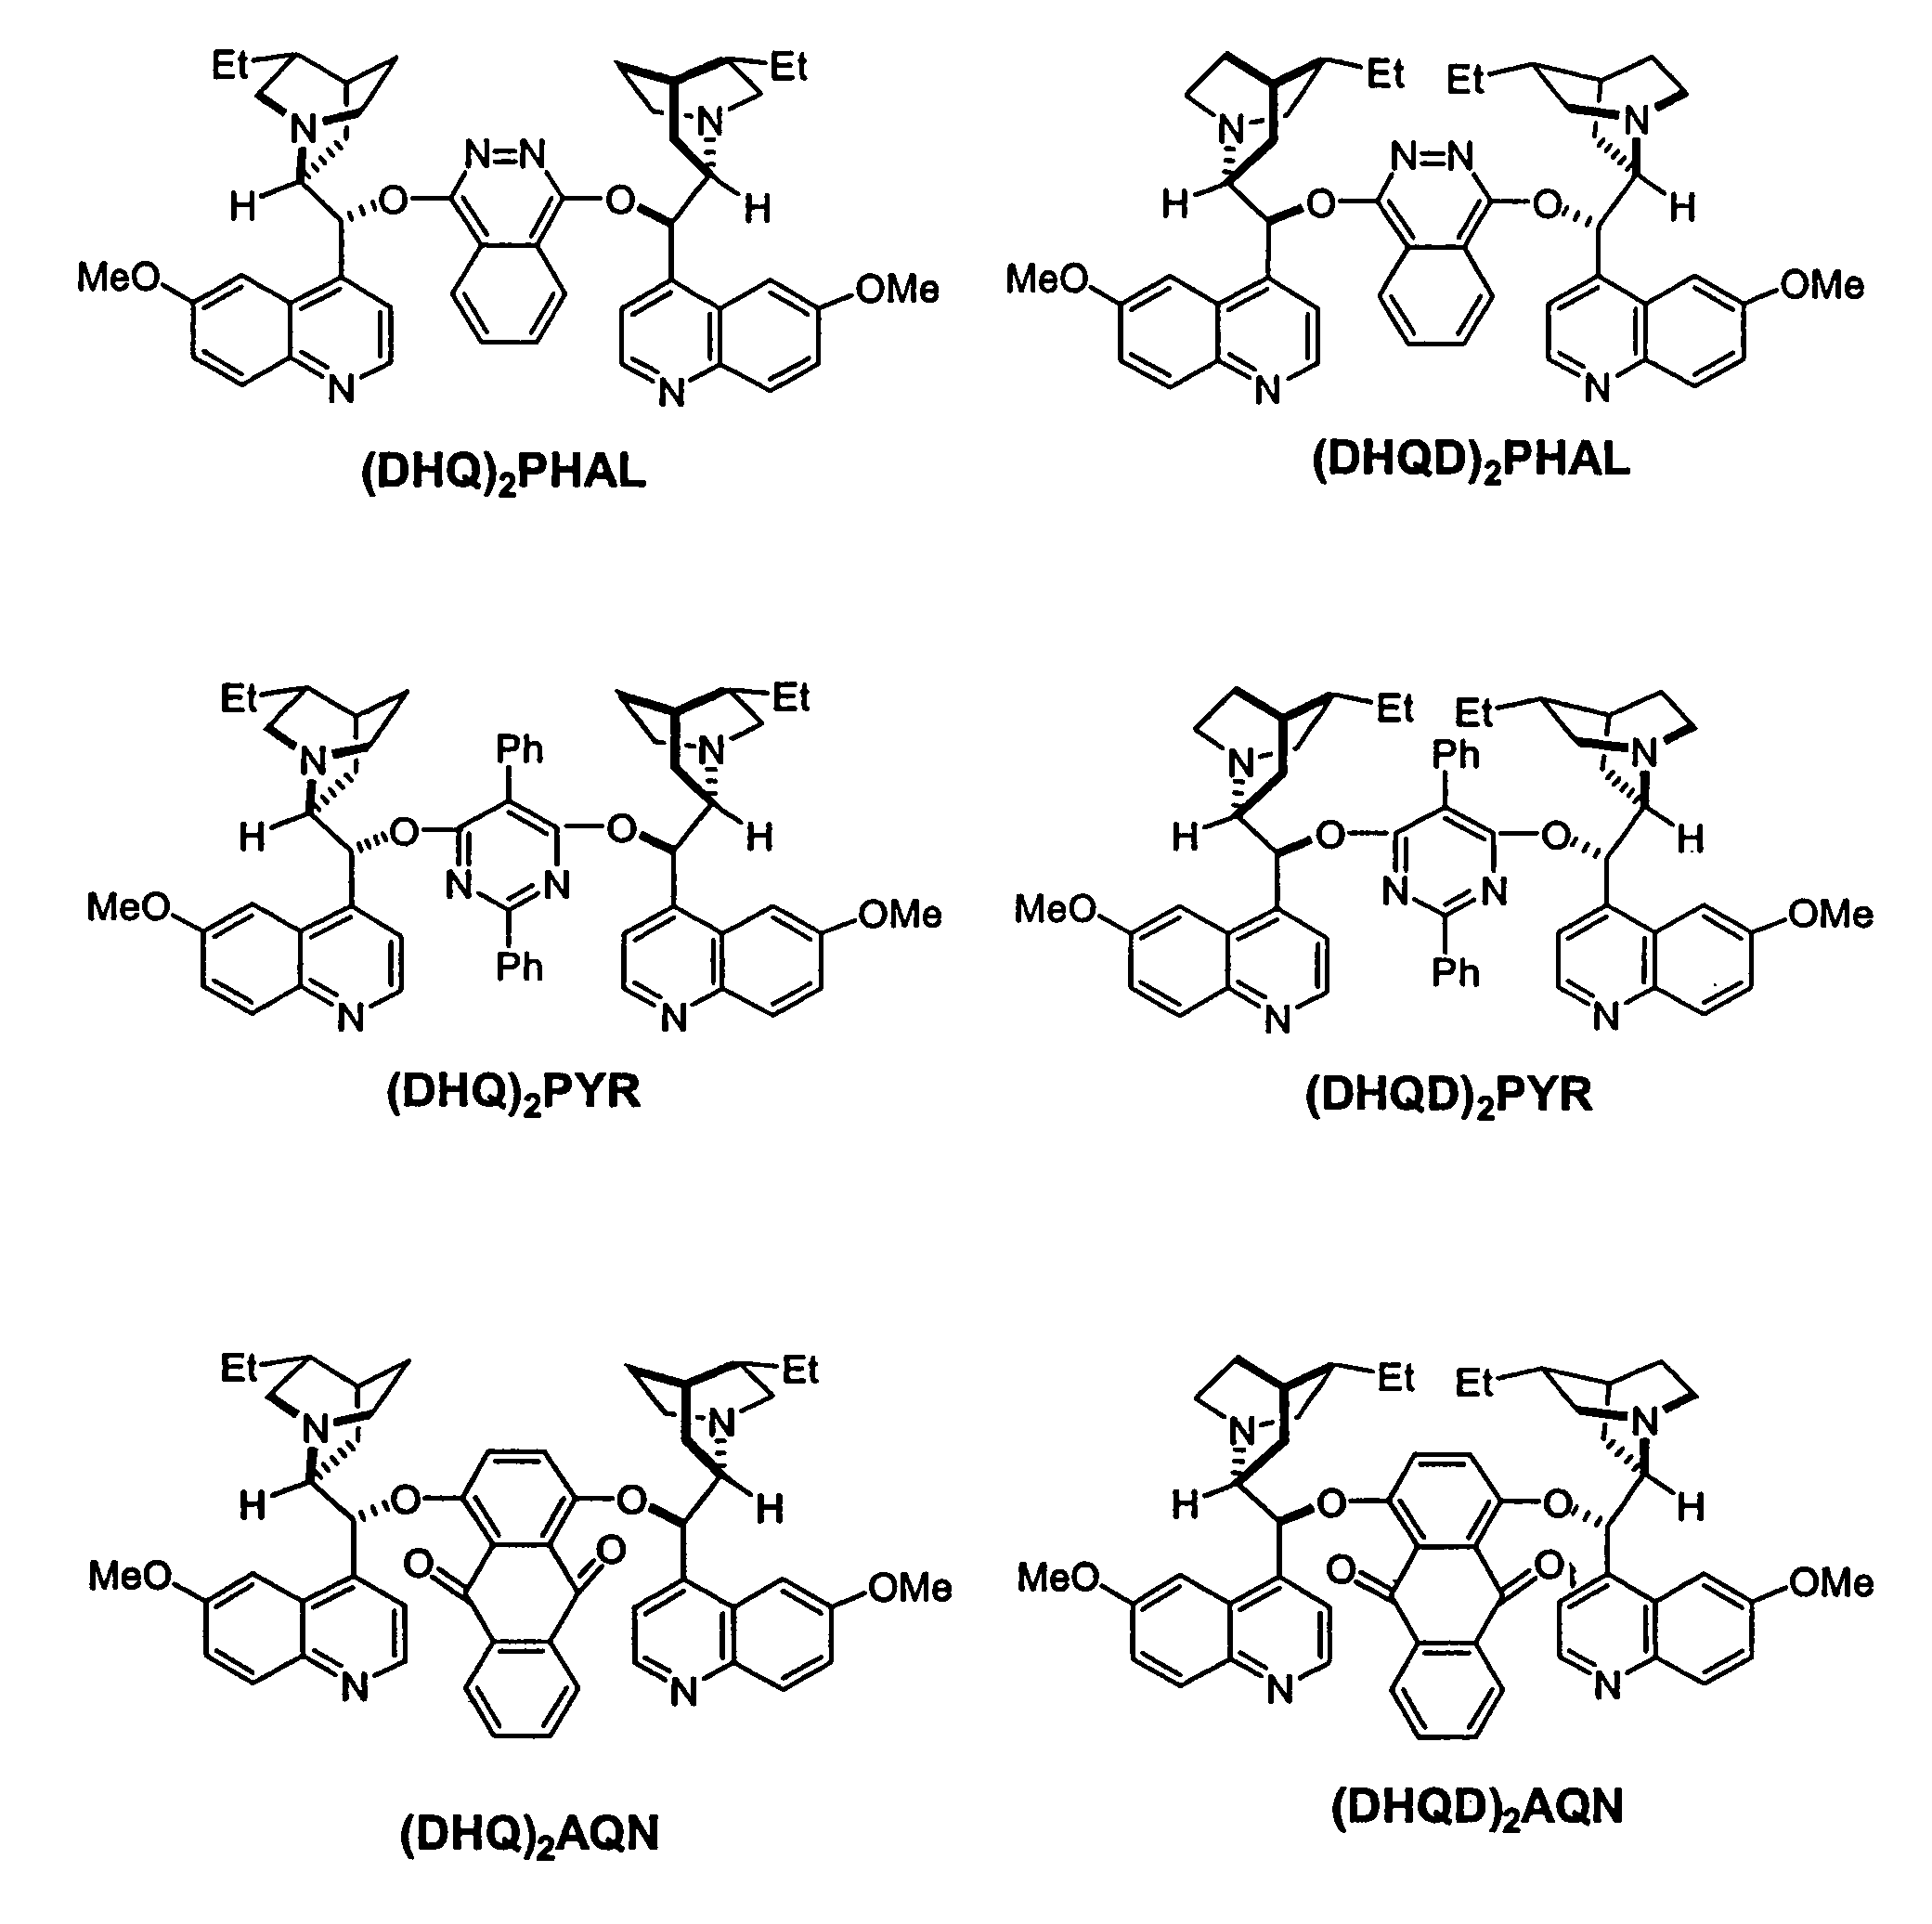 Kinetic resolutions of chiral 2- and 3-substituted carboxylic acids